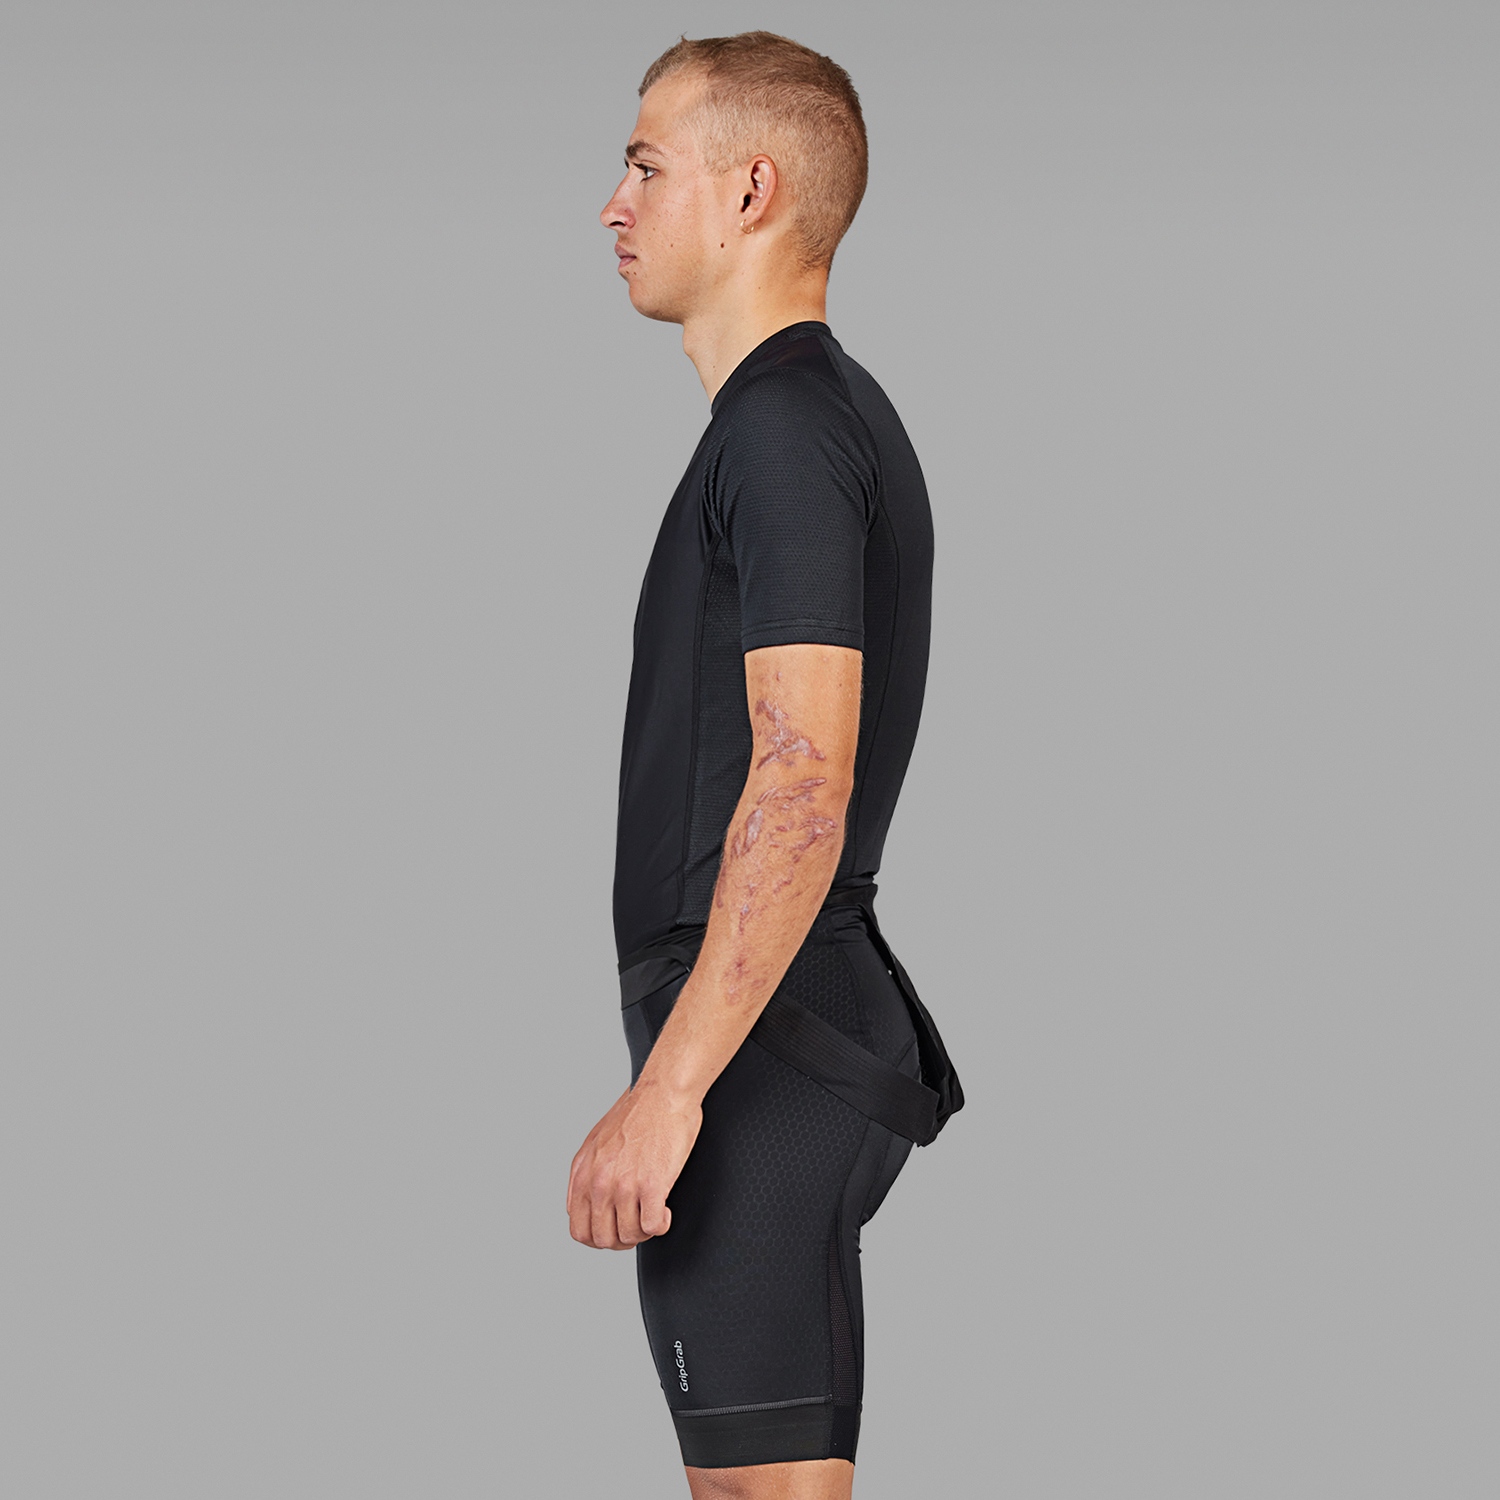 Review: GripGrab WindBreaking Thermal Short Sleeve Base Layer